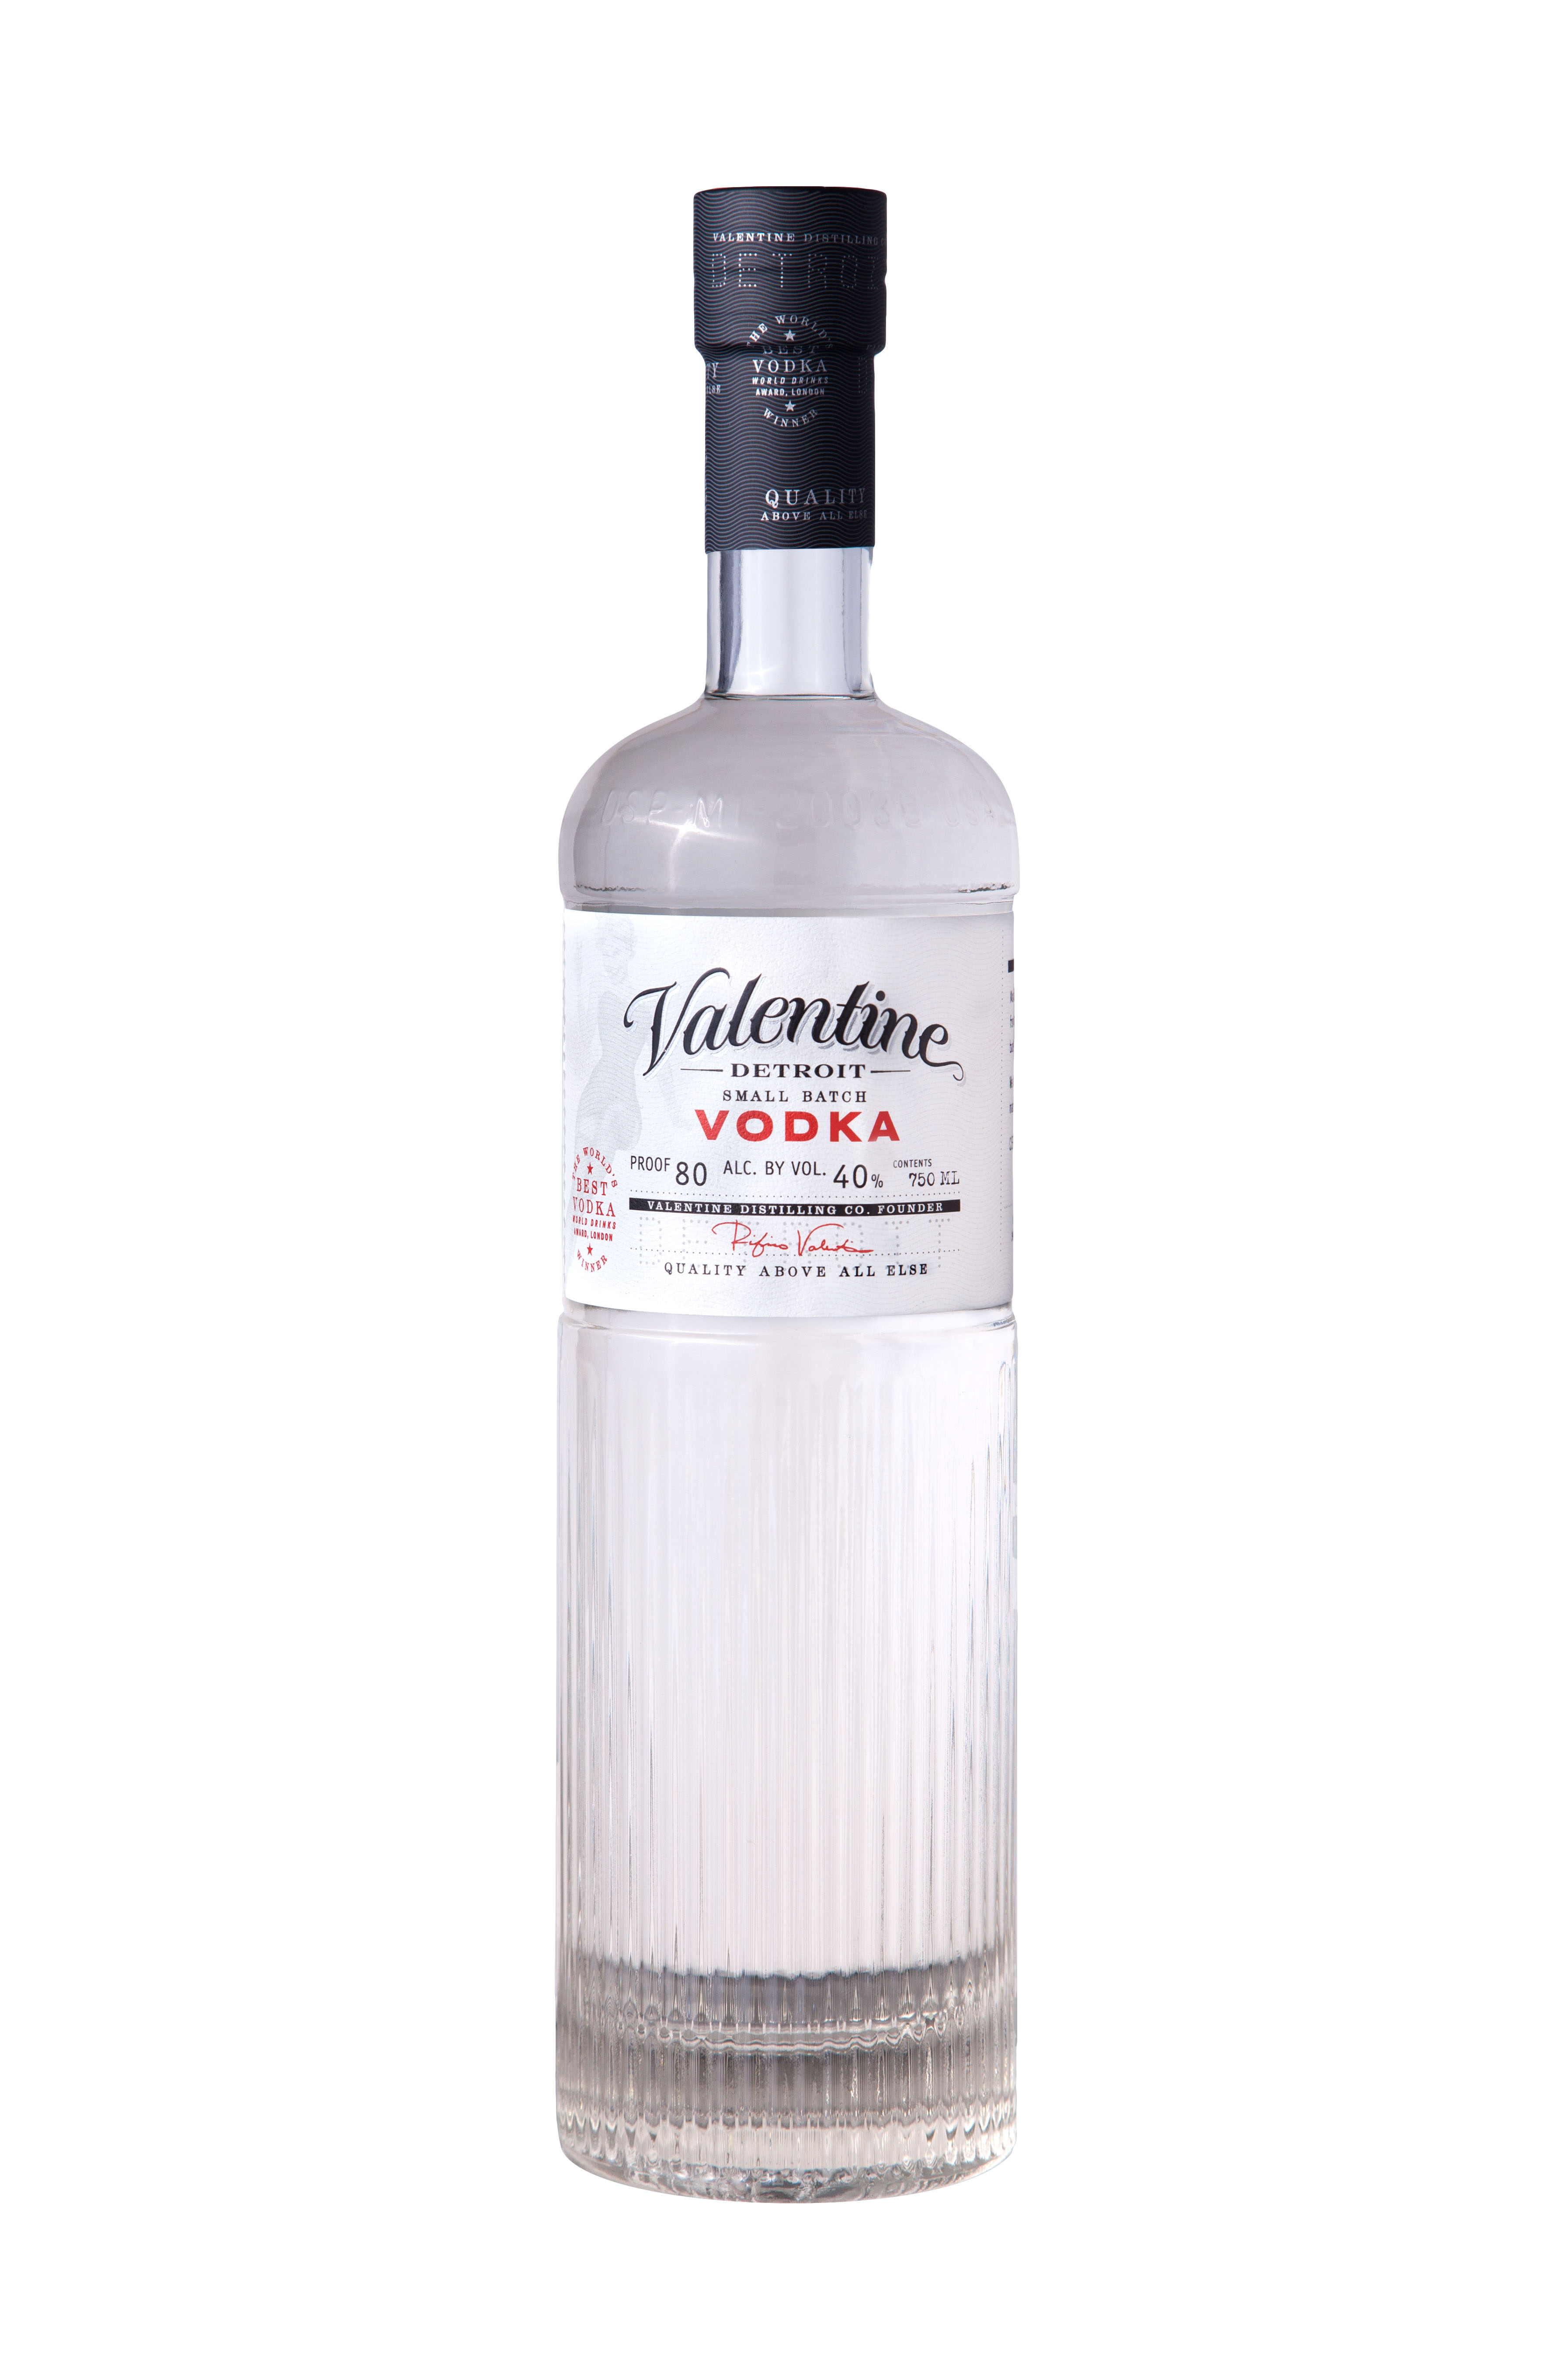 Valentine Vodka has a new look